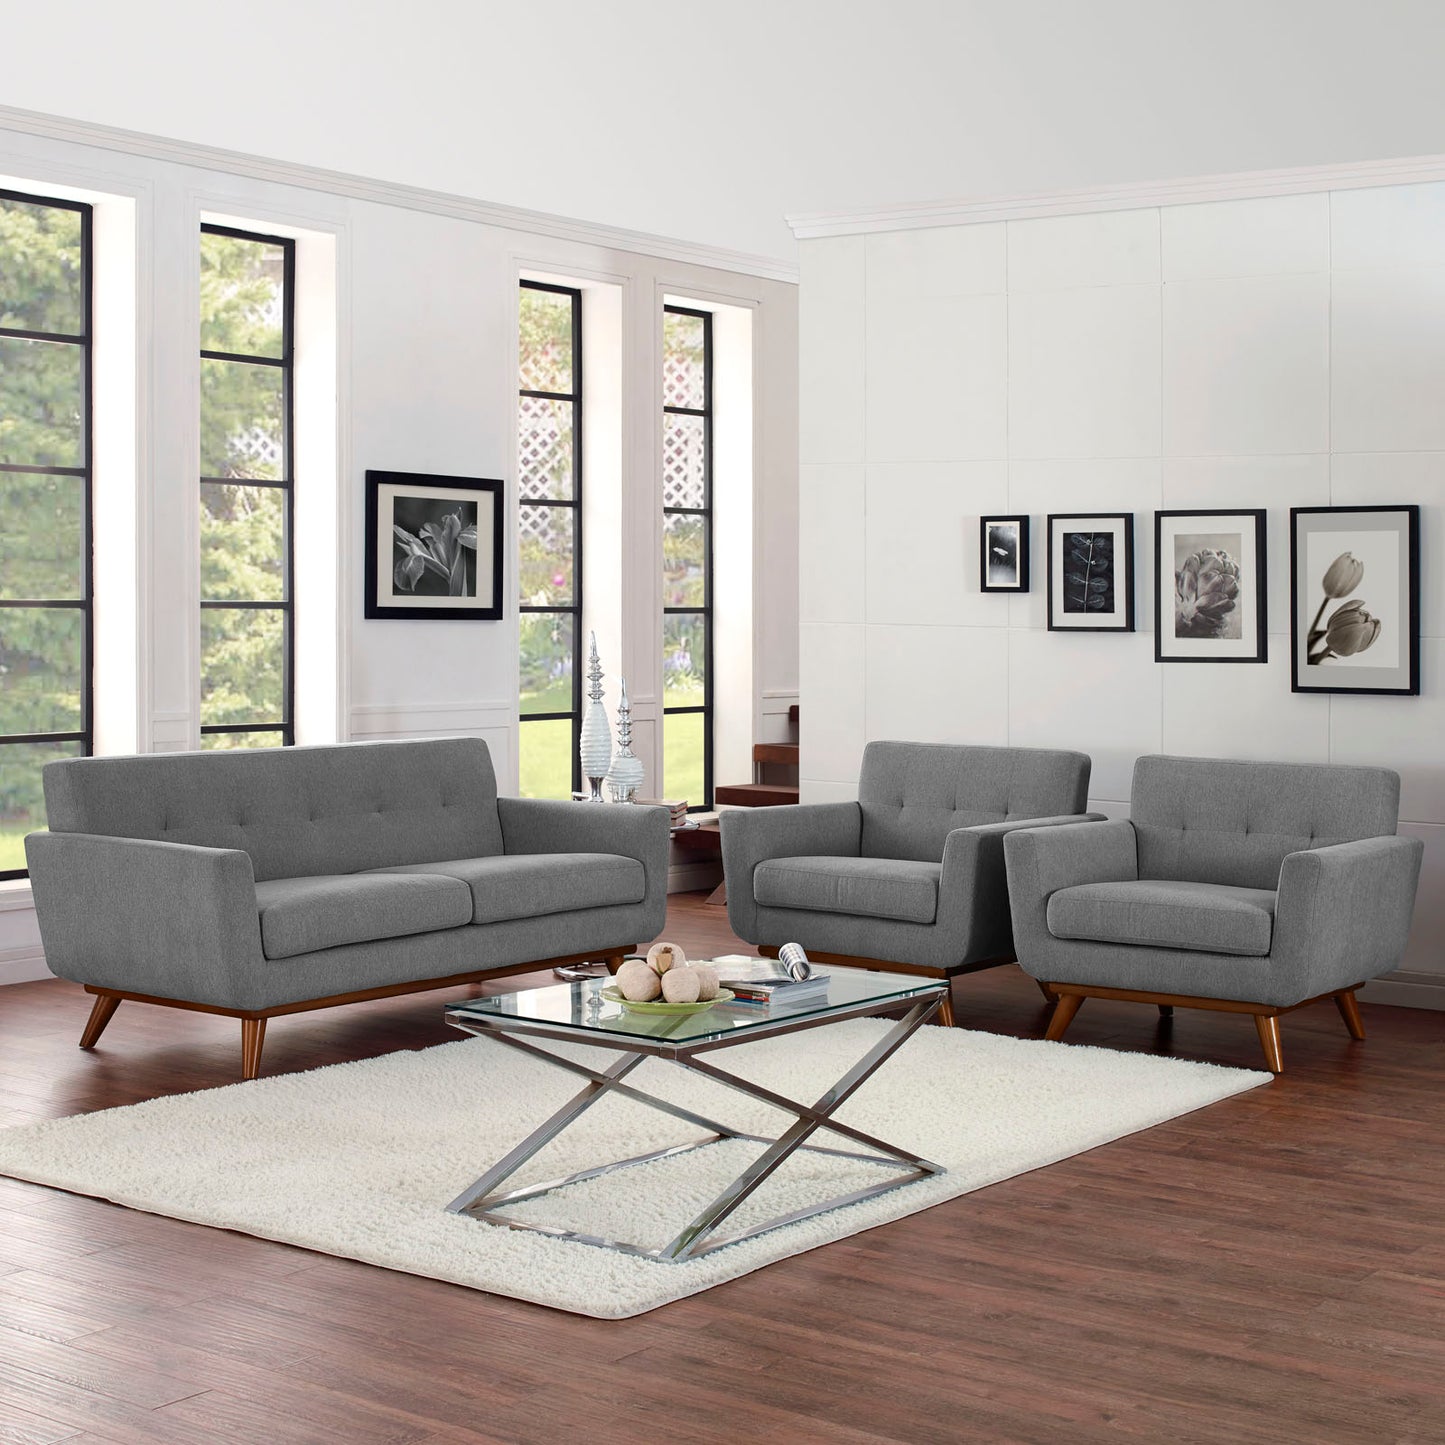 Engage Armchairs and Loveseat Set of 3 Expectation Gray EEI-1347-GRY